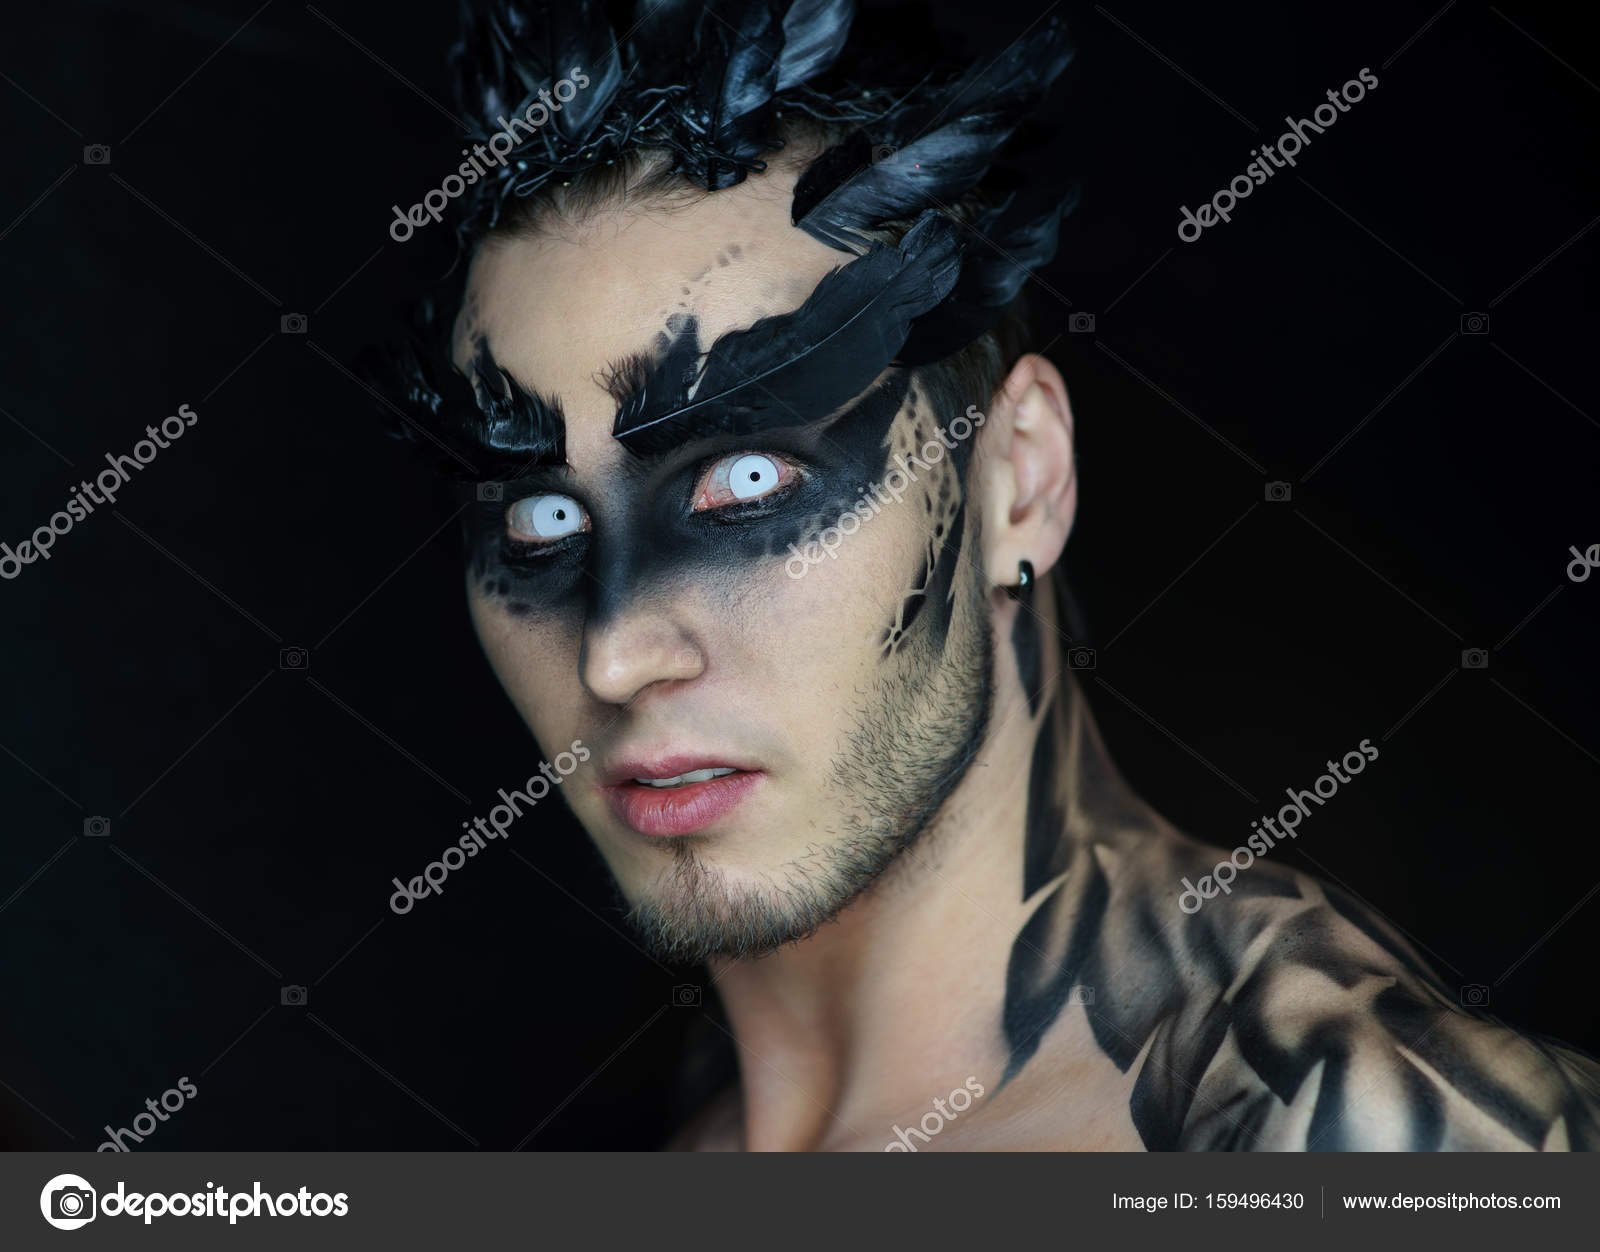 Ansvarlige person virksomhed Korrupt Make-up of a raven or another bird on a man Stock Photo by  ©butoc_89@mail.ru 159496430